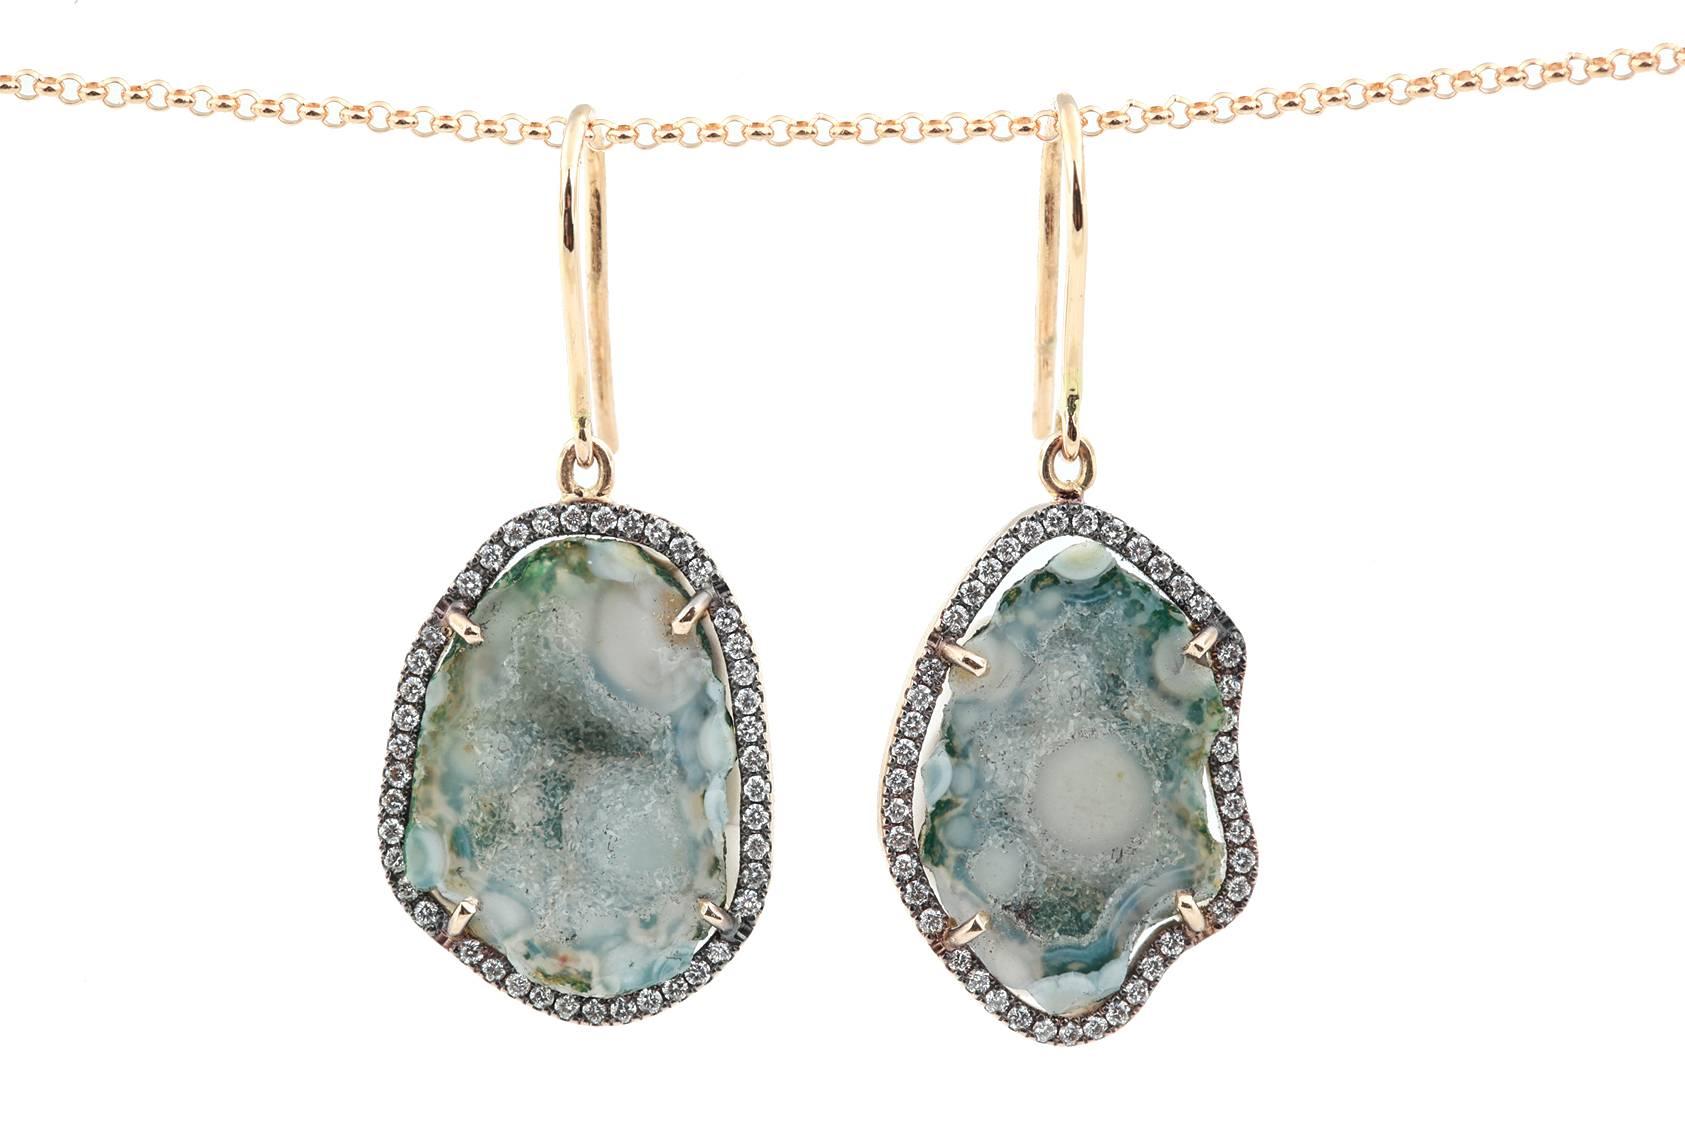 Karolin's jewellery is totally unique.
So are these hand-picked agate geode stones in light green.
The 18k rose gold settings are framed by 0.39 ct of diamonds that follow the organic contours.
Wear them in Summer or add them to your Winter Whites.

